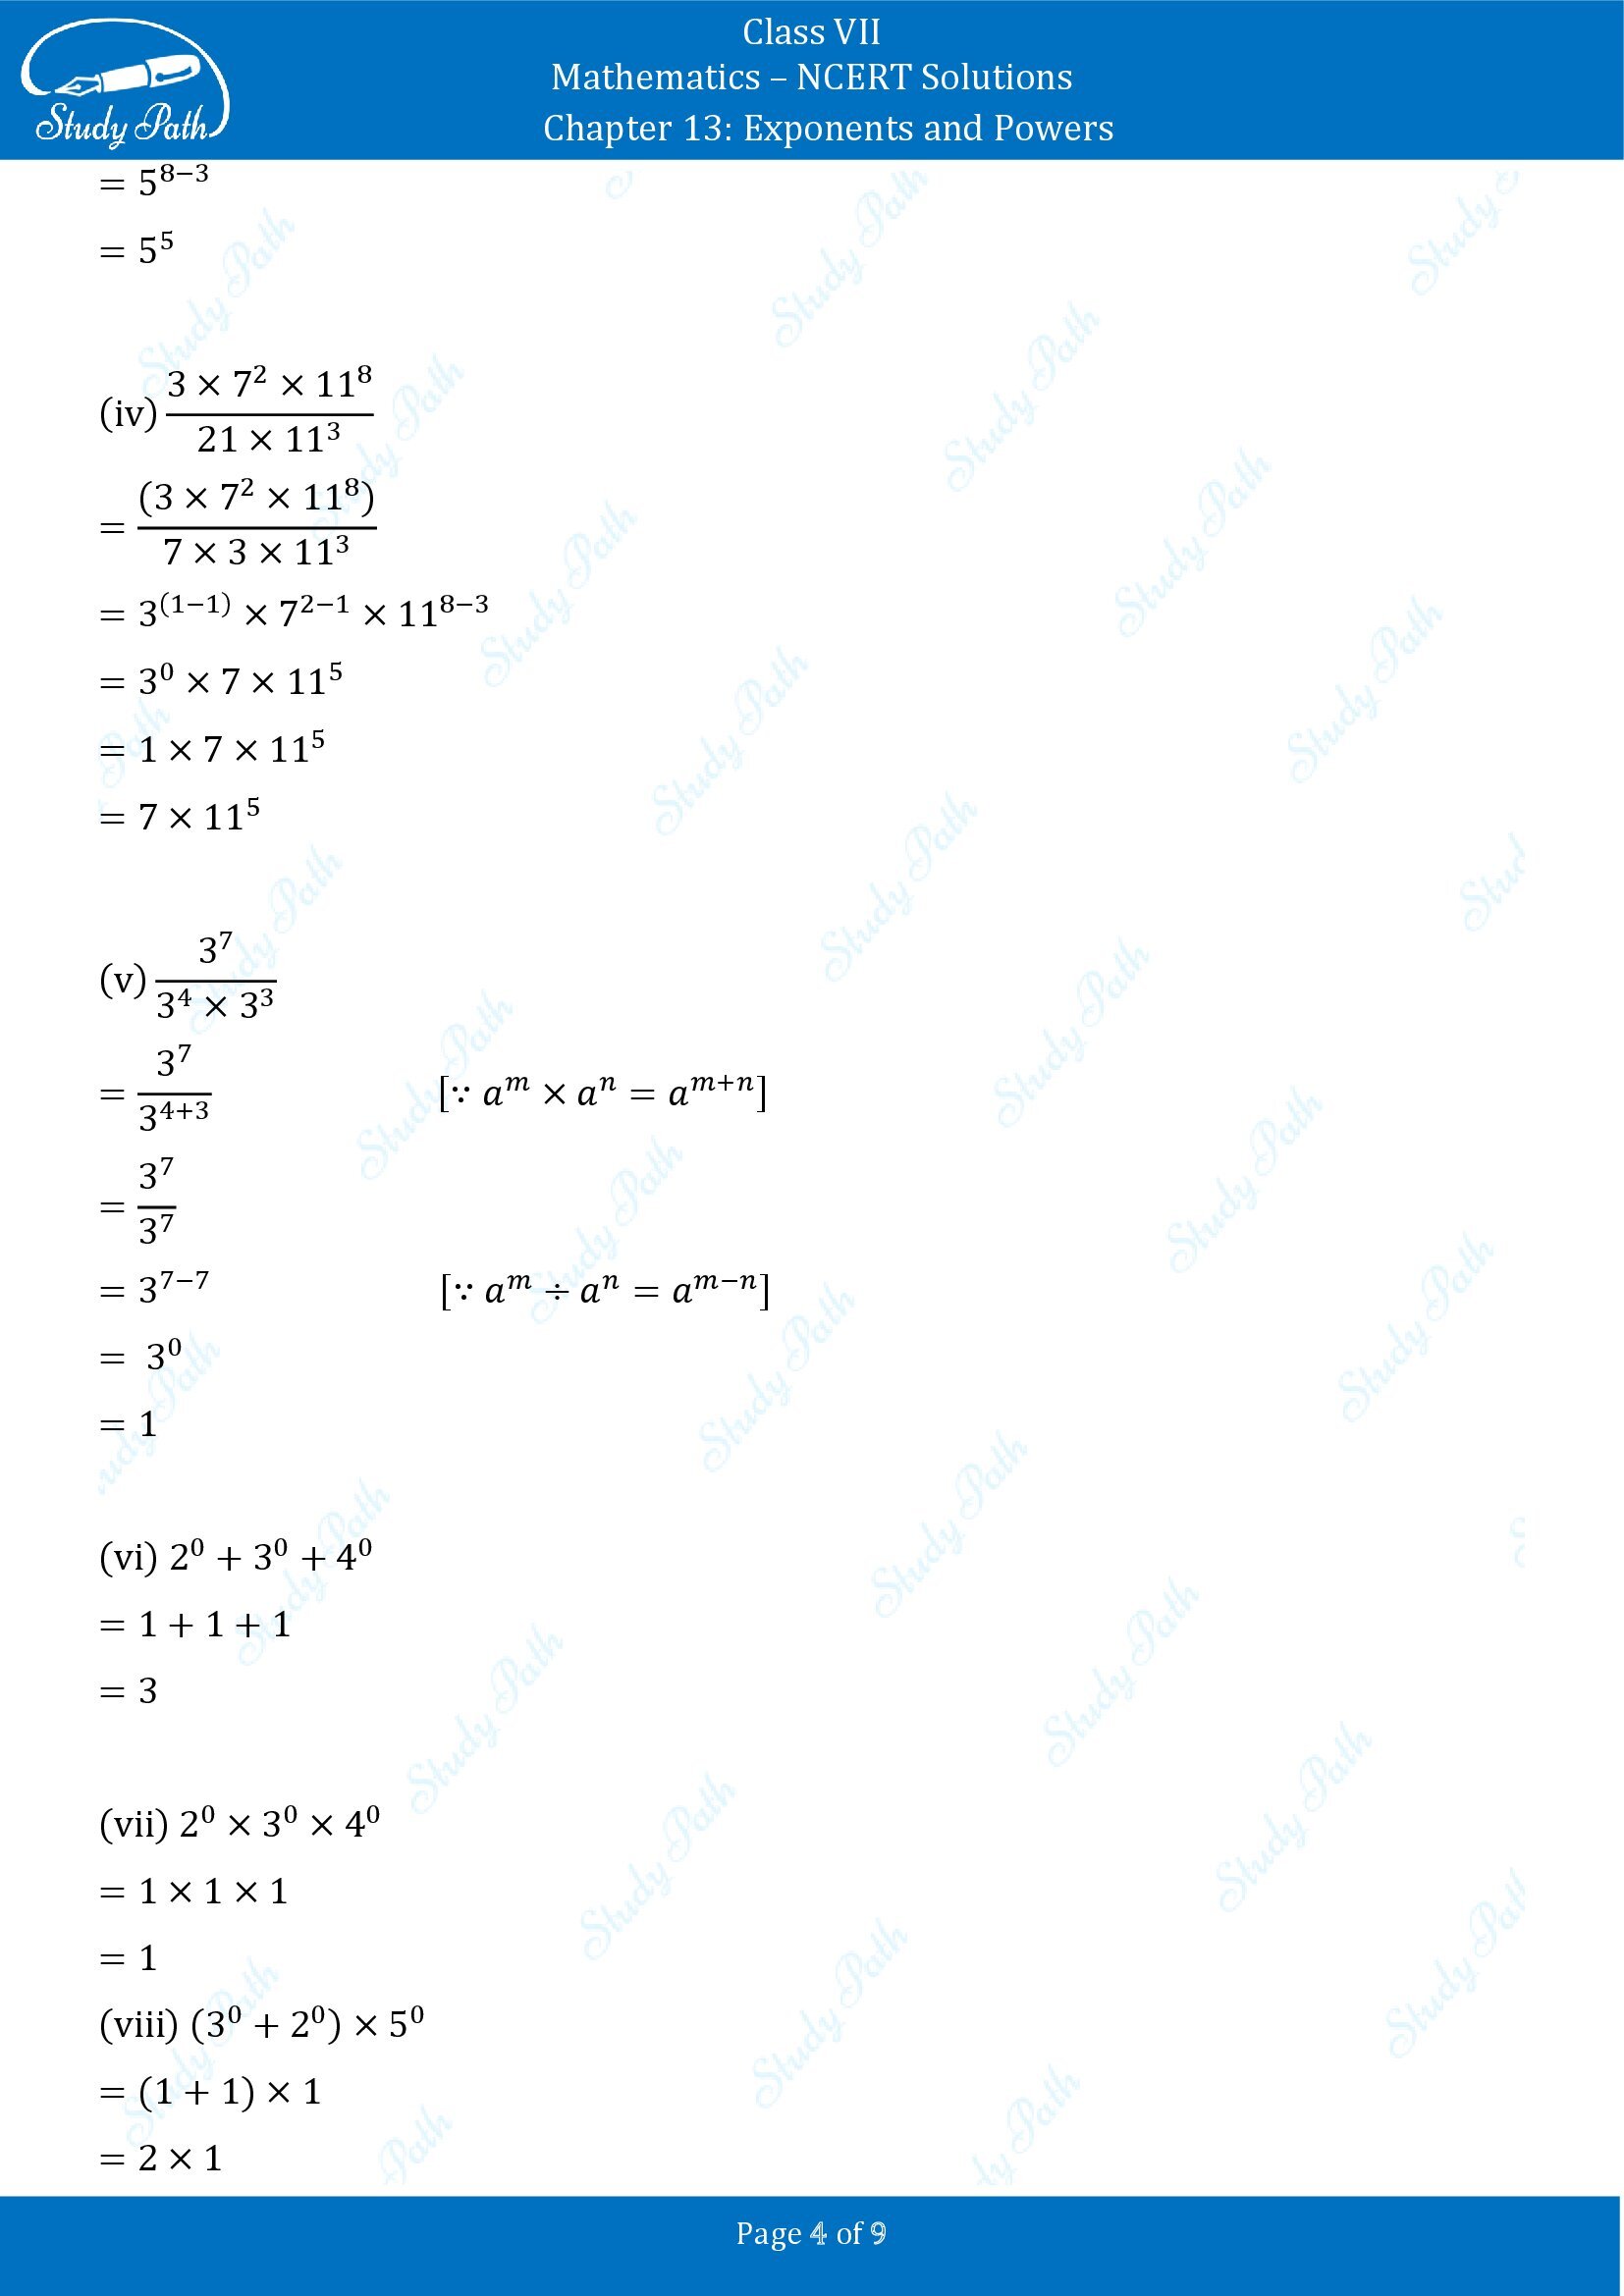 NCERT Solutions for Class 7 Maths Chapter 13 Exponents and Powers Exercise 13.2 00004